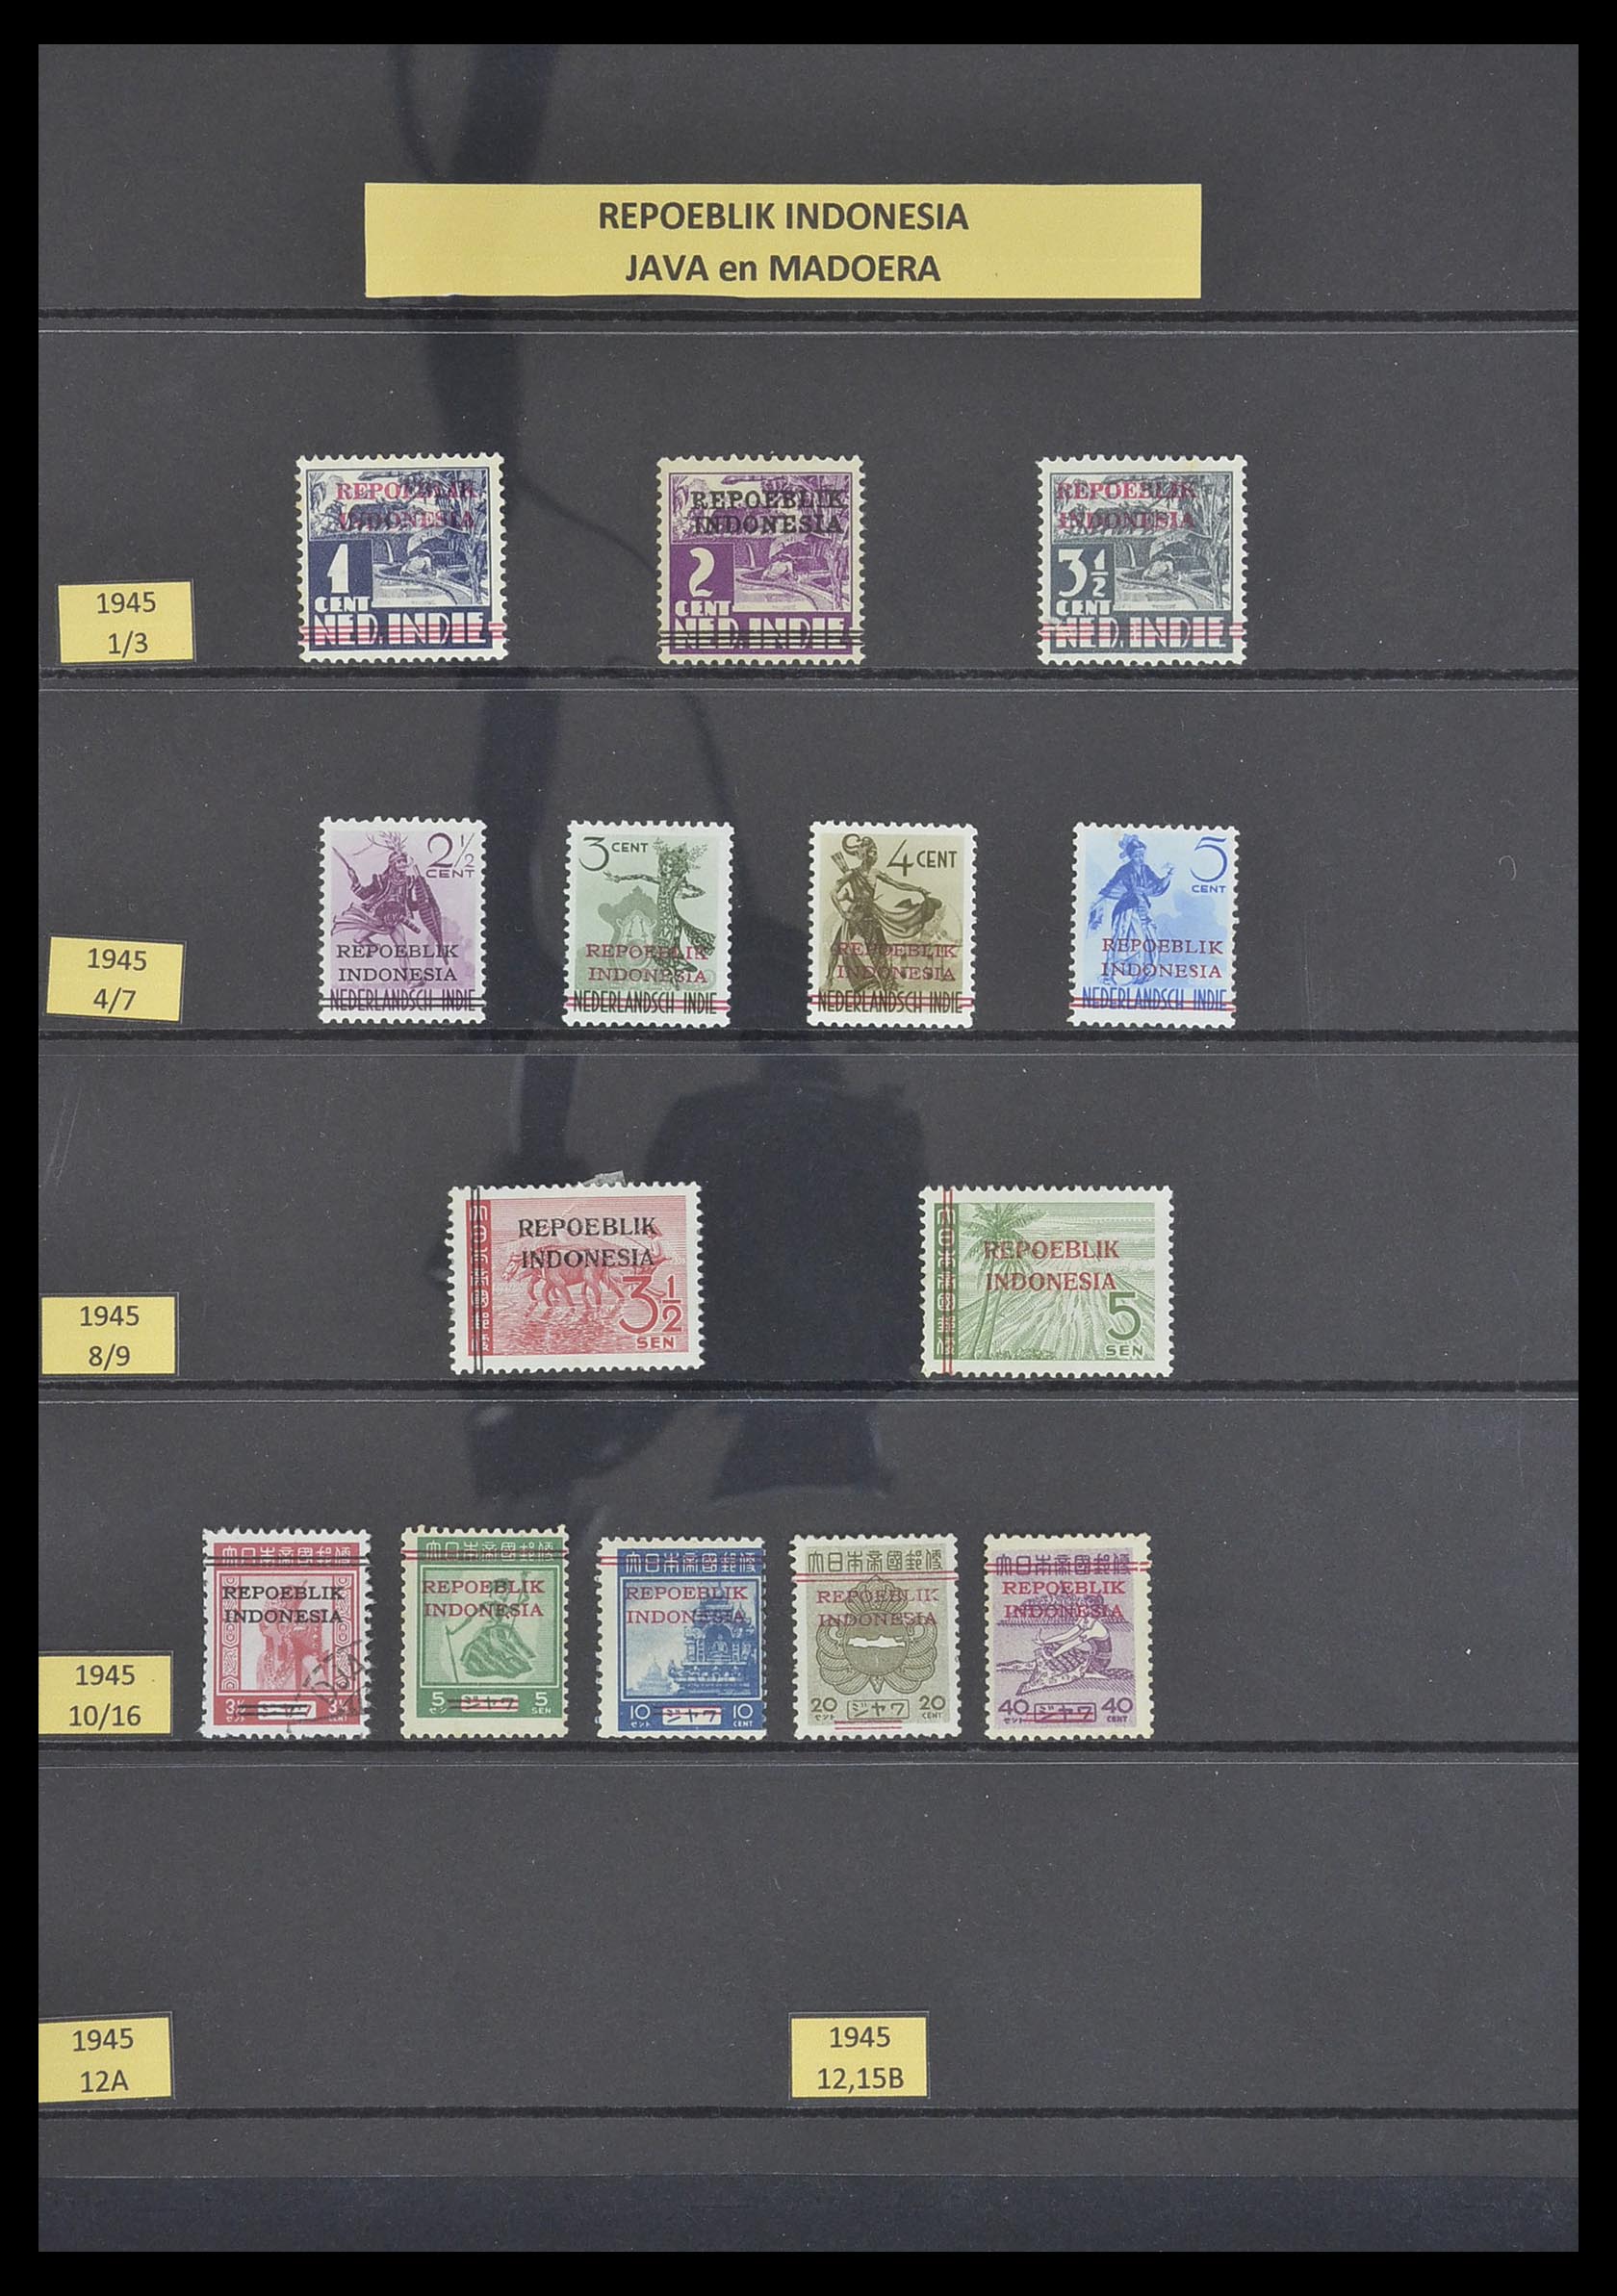 33483 001 - Stamp collection 33483 Indonesia 1945-1999.